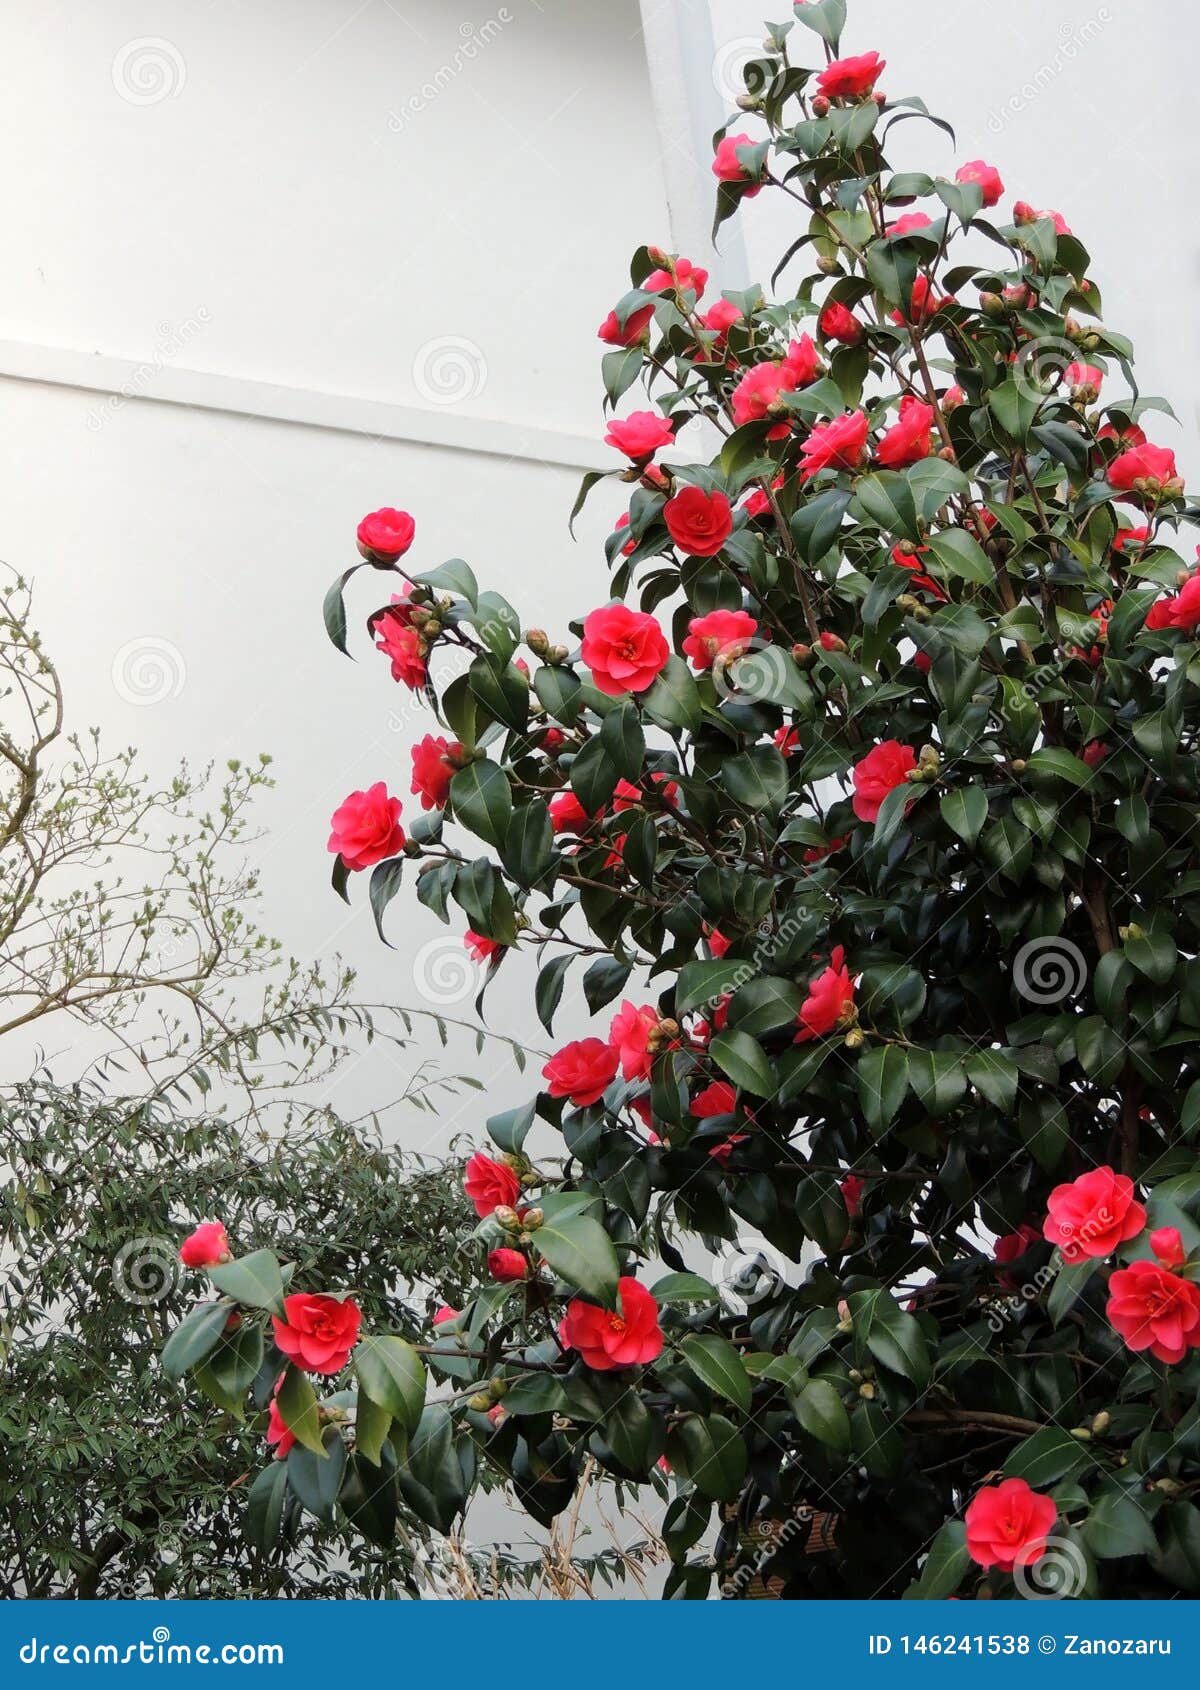 Camellia Tree with Red Flowers Stock Photo - Image of shrub, spring:  146241538